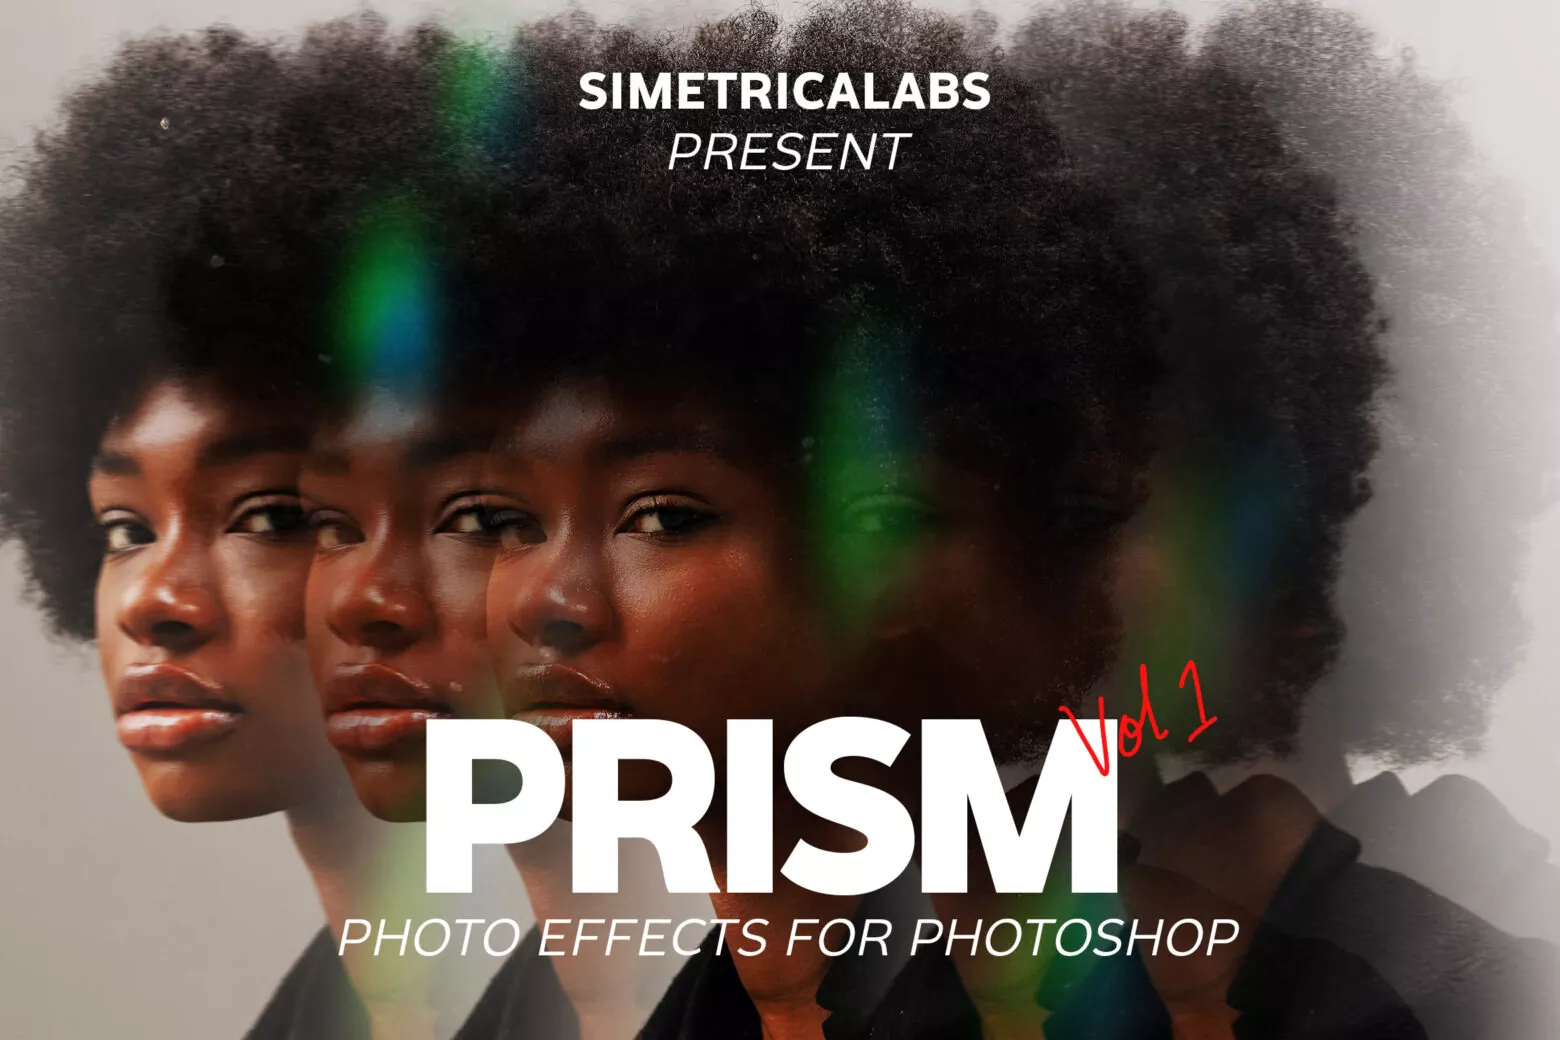 Prism Effects Vol 1